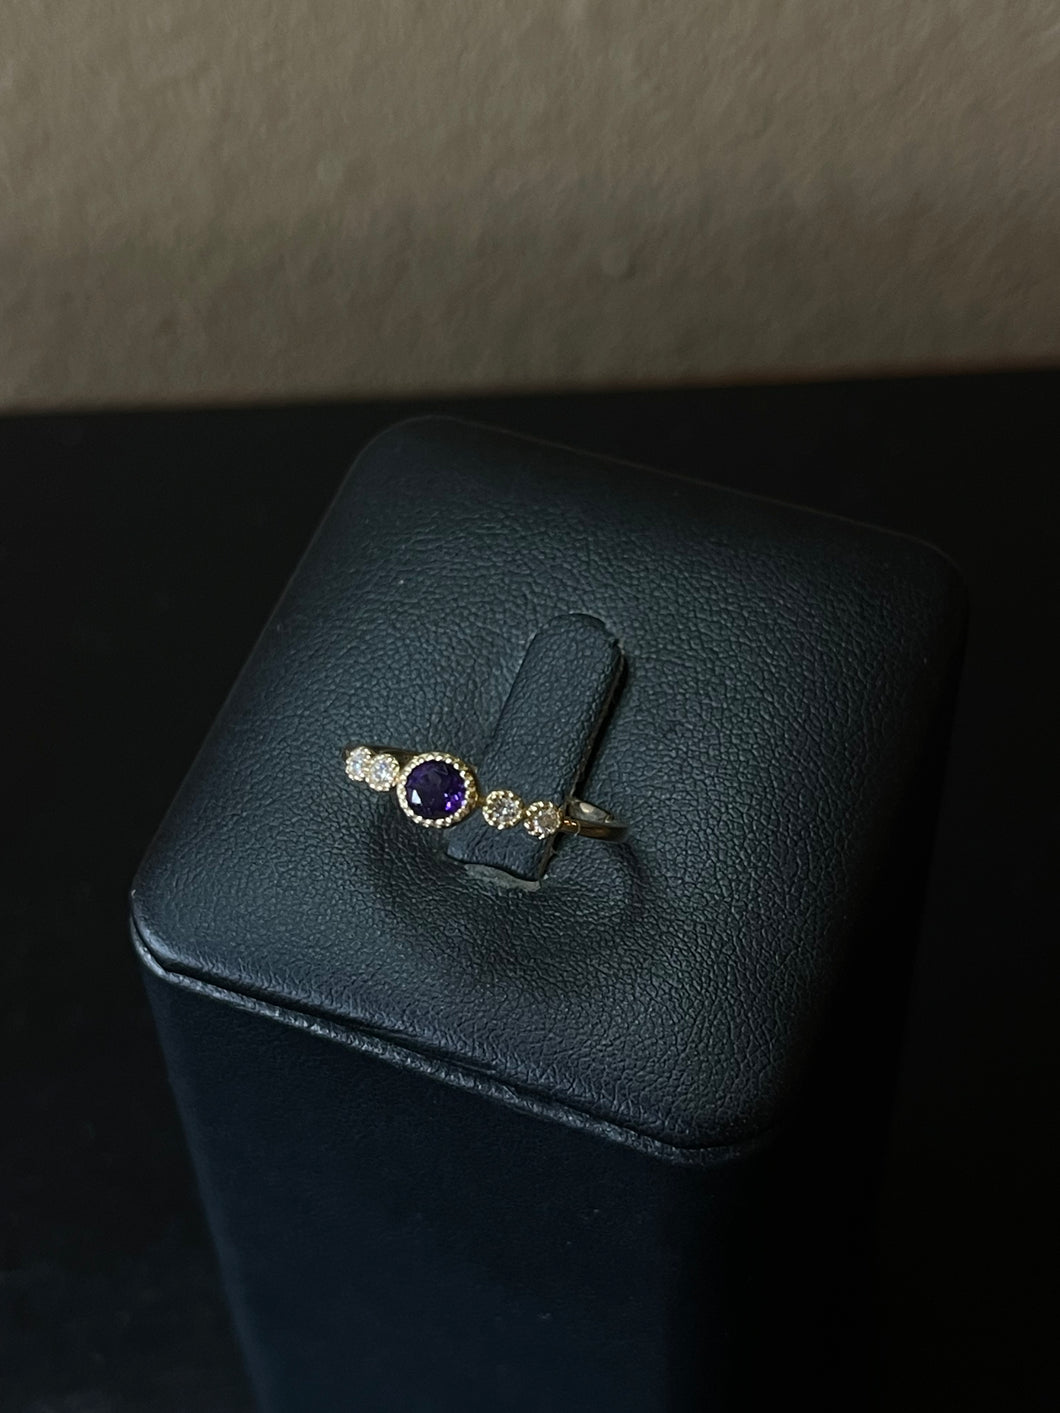 Enchanting Amethyst and Diamond Ring in 14k Yellow Gold